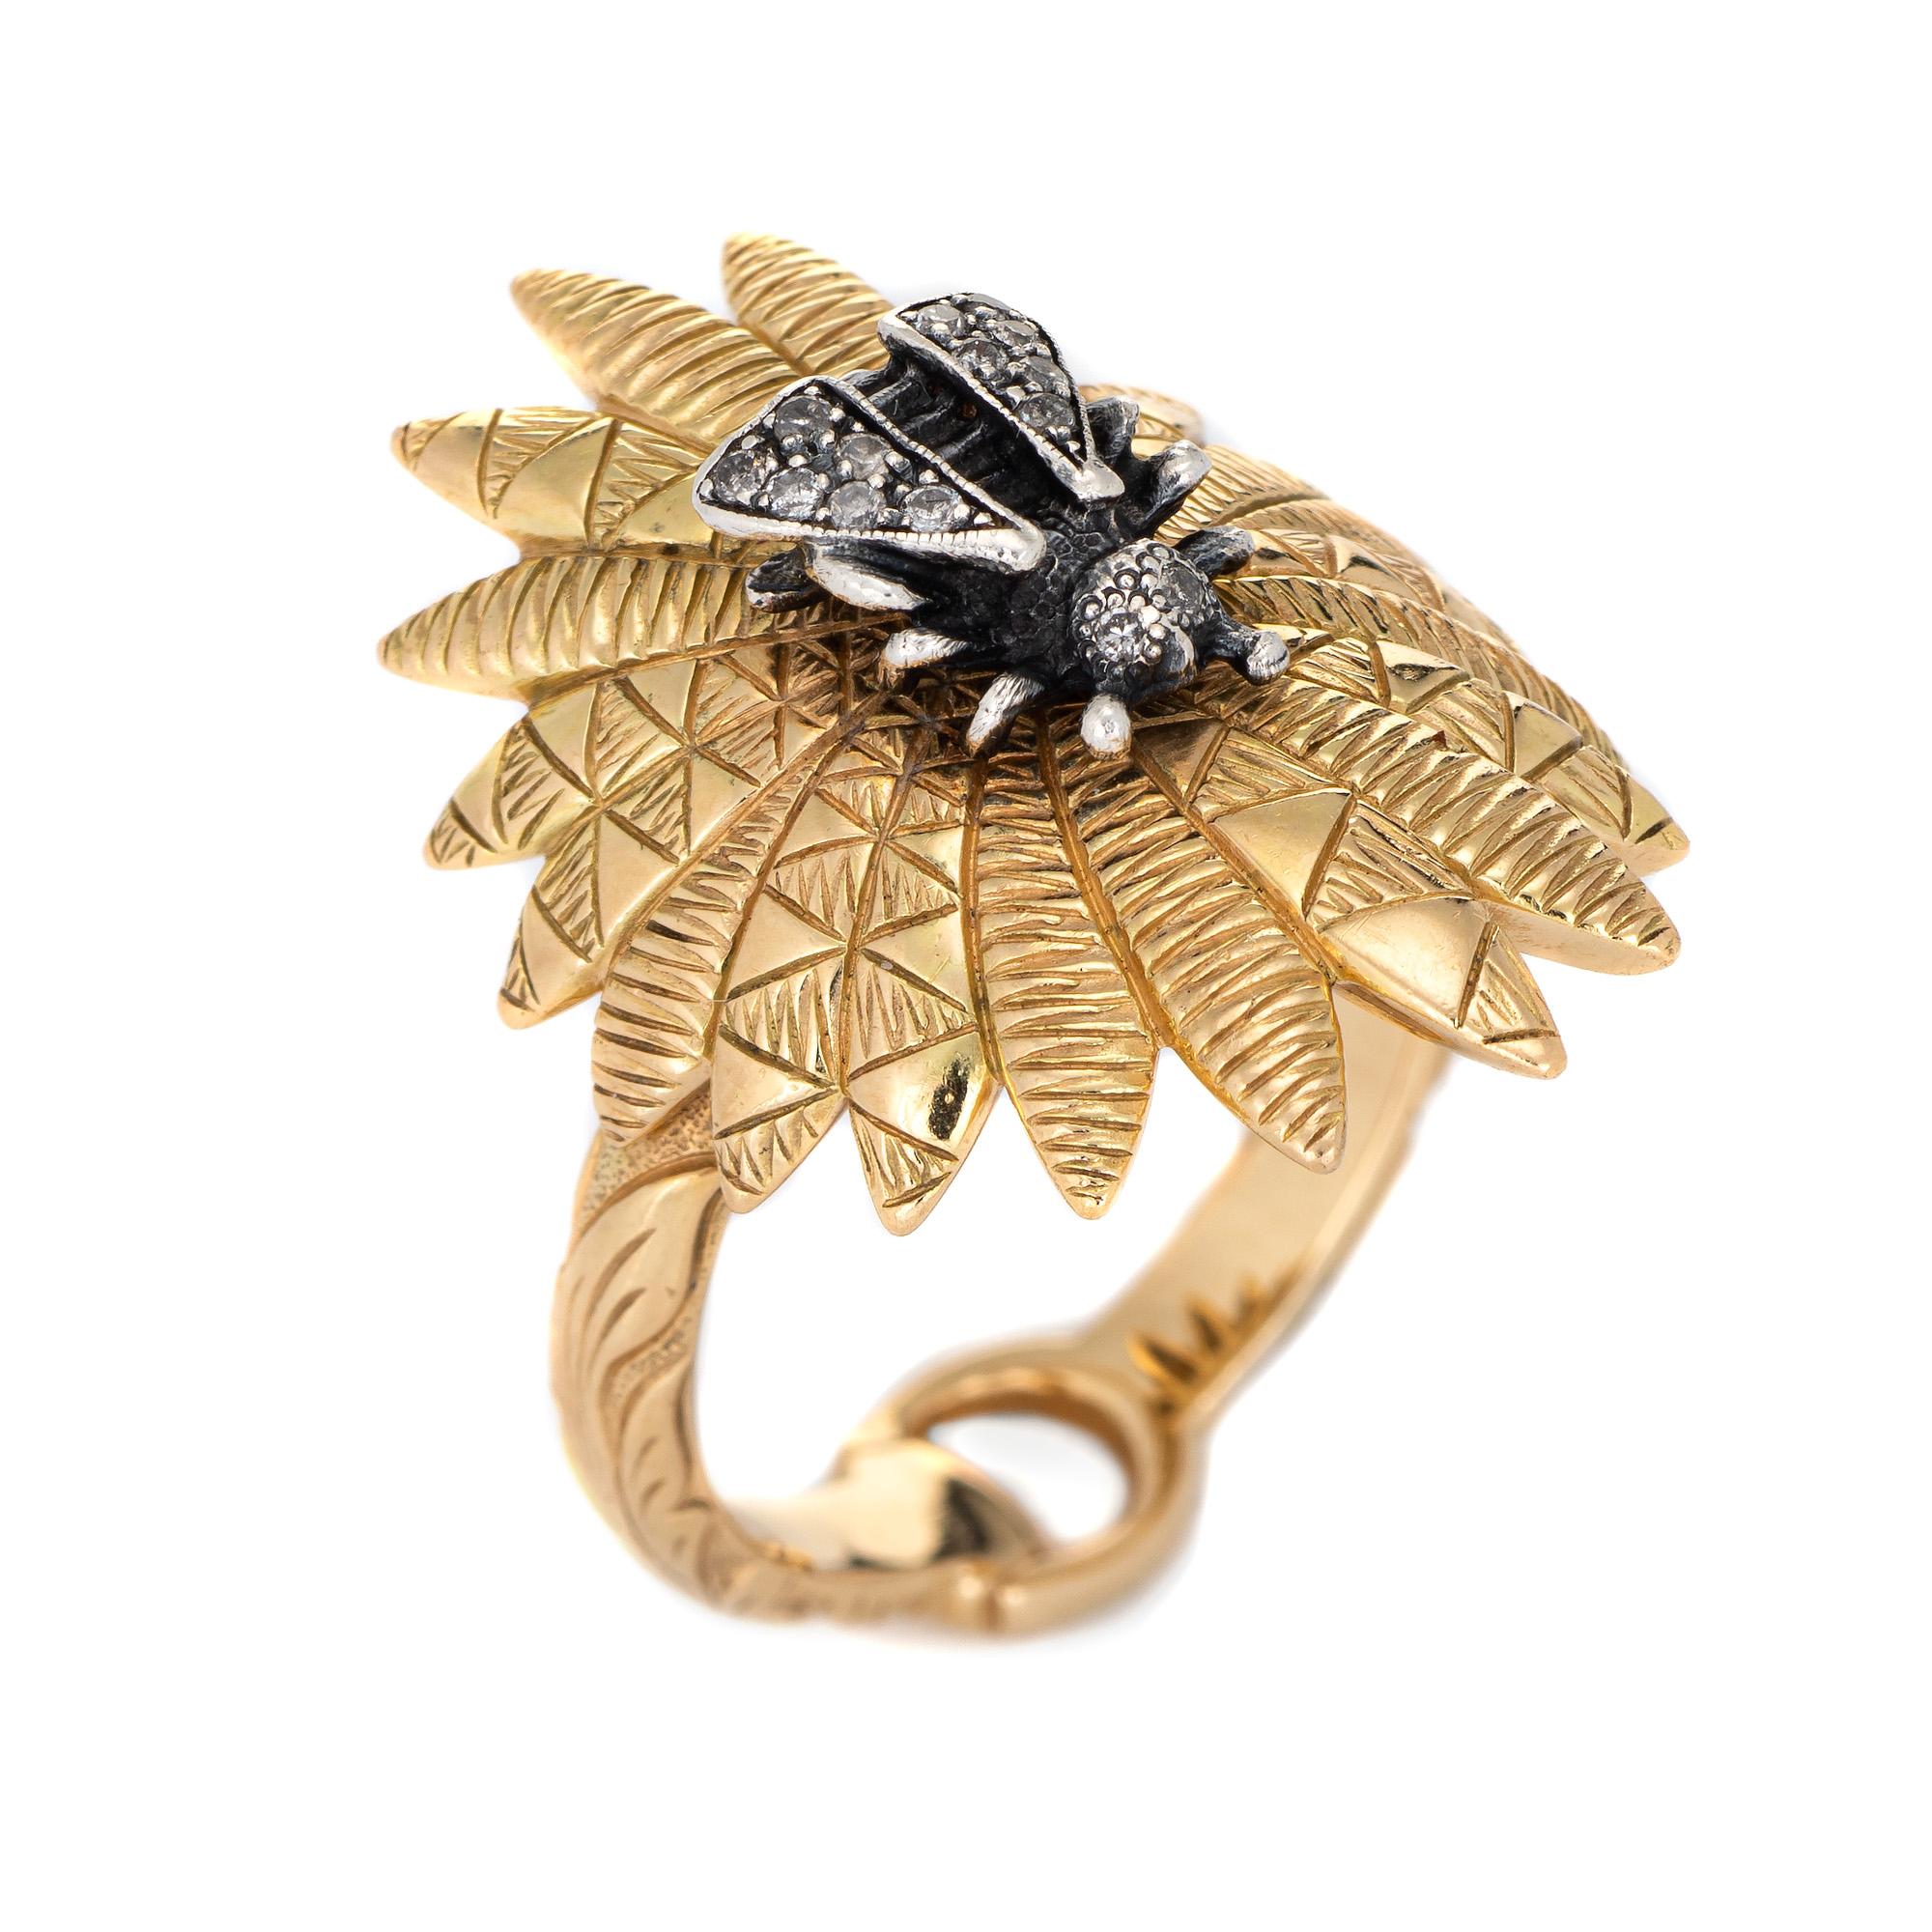 Stylish pre-owned Gucci diamond bee ring crafted in 18 karat yellow gold and sterling silver. 

Diamonds total an estimated 0.07 carats (estimated at H-I color and SI2-I1 clarity). 

The petite bee sits upon a textured mount, slightly curved in a